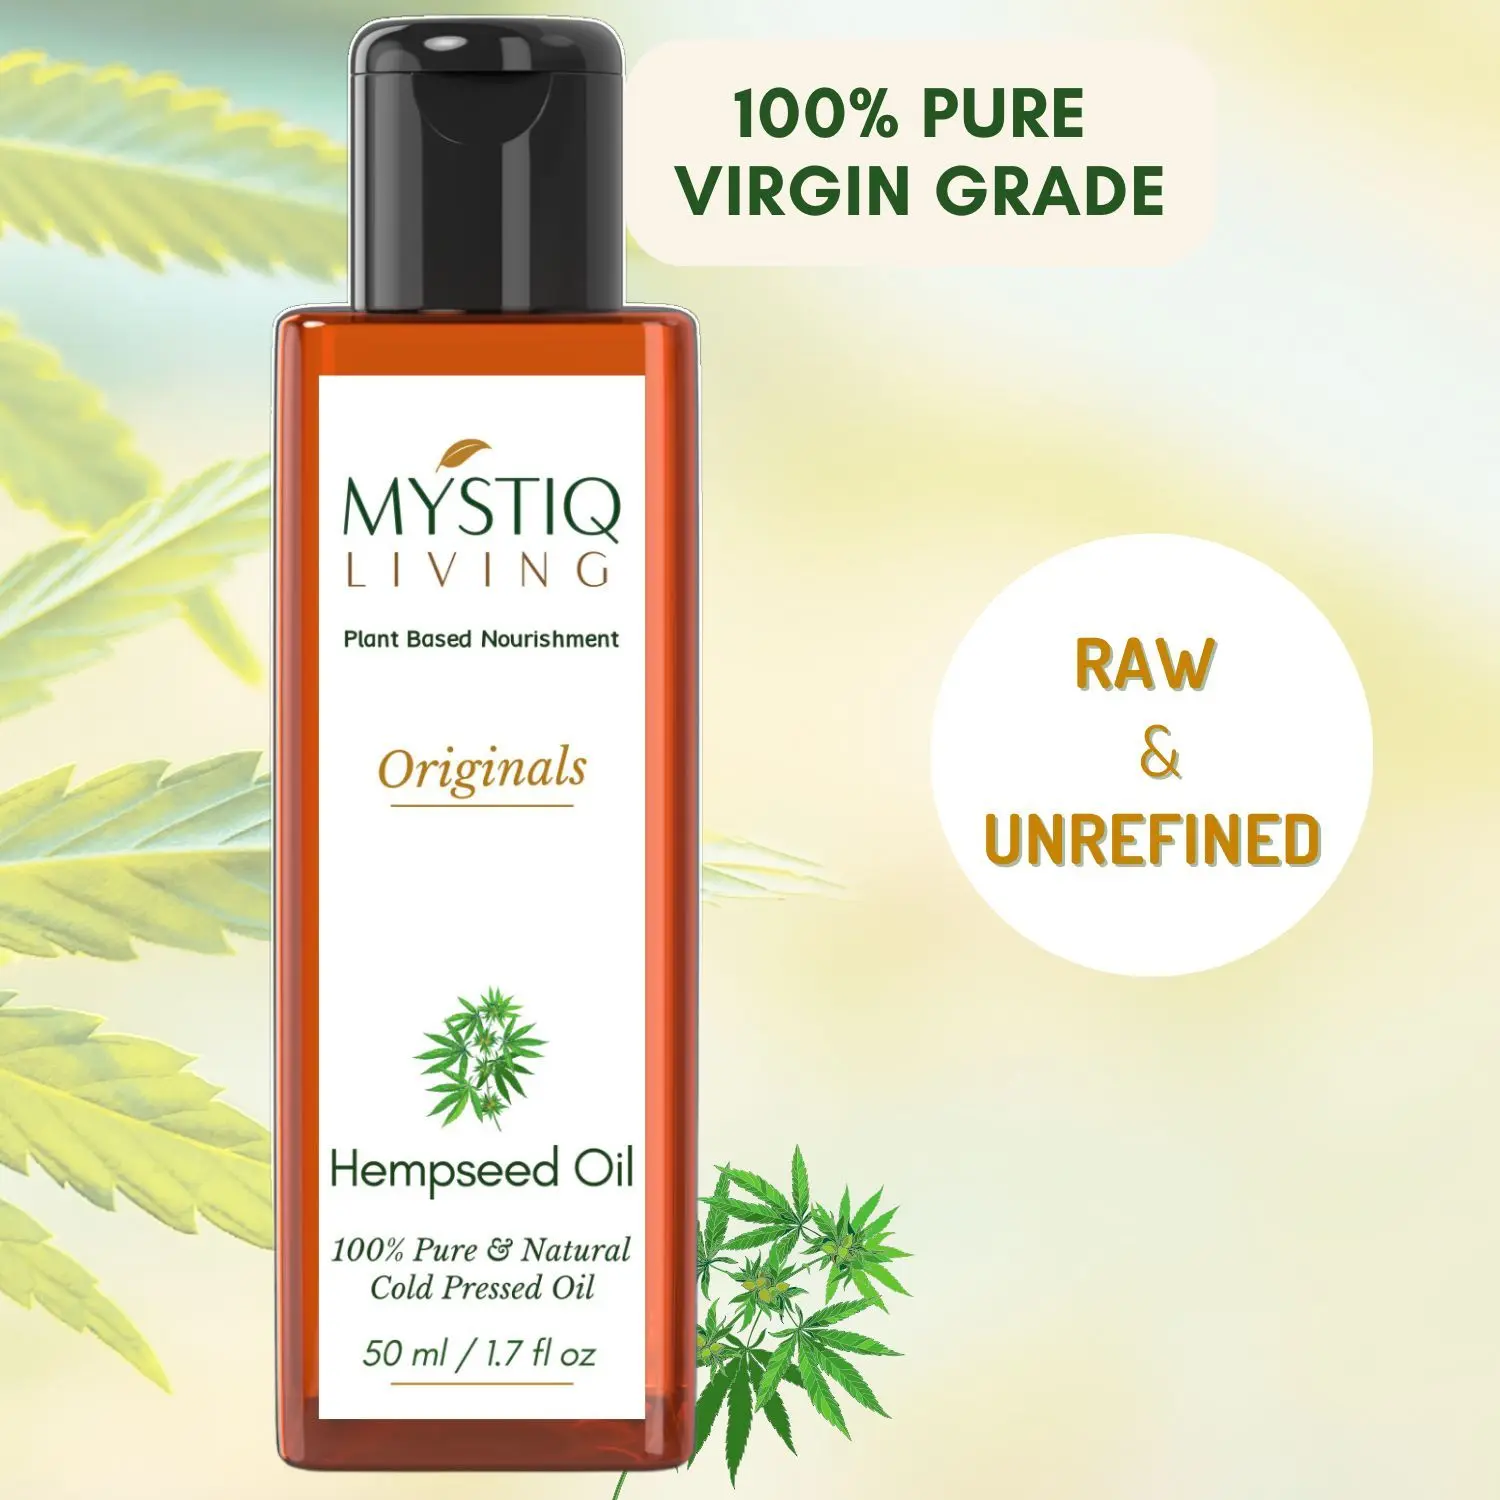 Mystiq Living Originals - Hemp Seed Oil For Face & Hair. Better Sleep, helps with Wrinkles, Fine Lines, and Expression Lines-50 ML